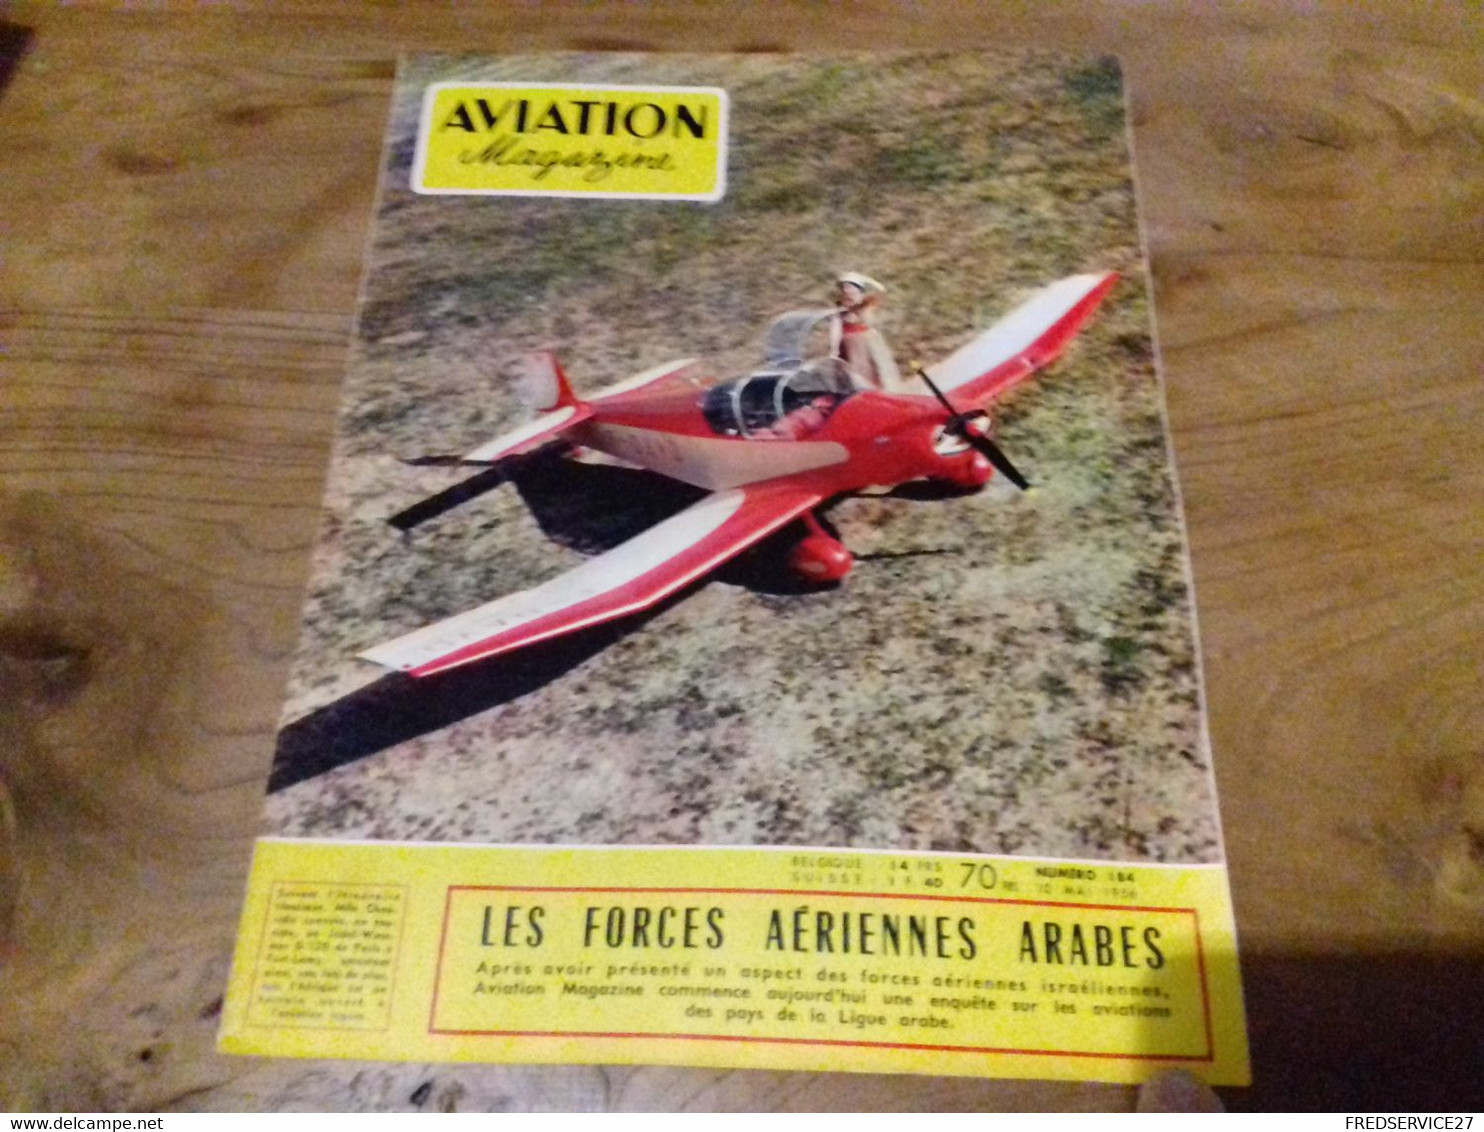 40/ AVIATION MAGAZINE N° 184 1956 LES FORCES AERIENNES ARABES / F OAVD - Aviation